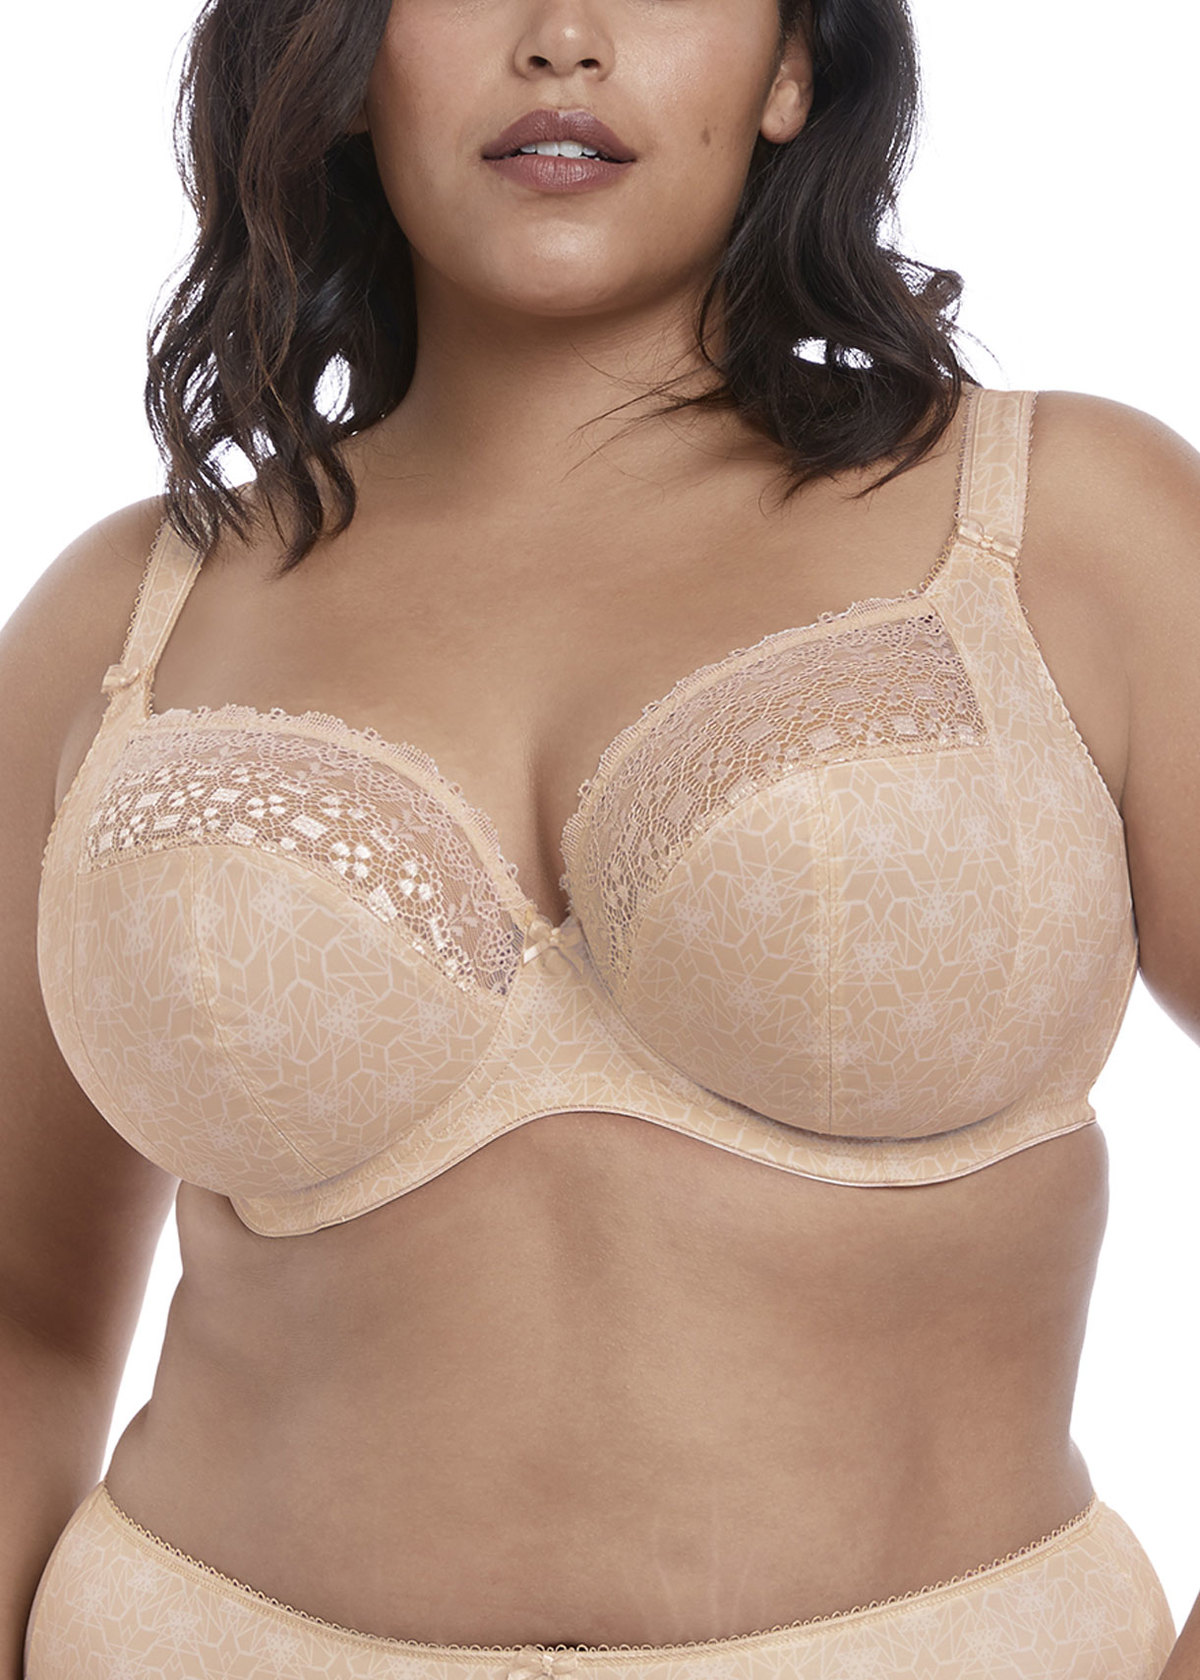 Find the Perfect Fitting Bra at Brief Essentials